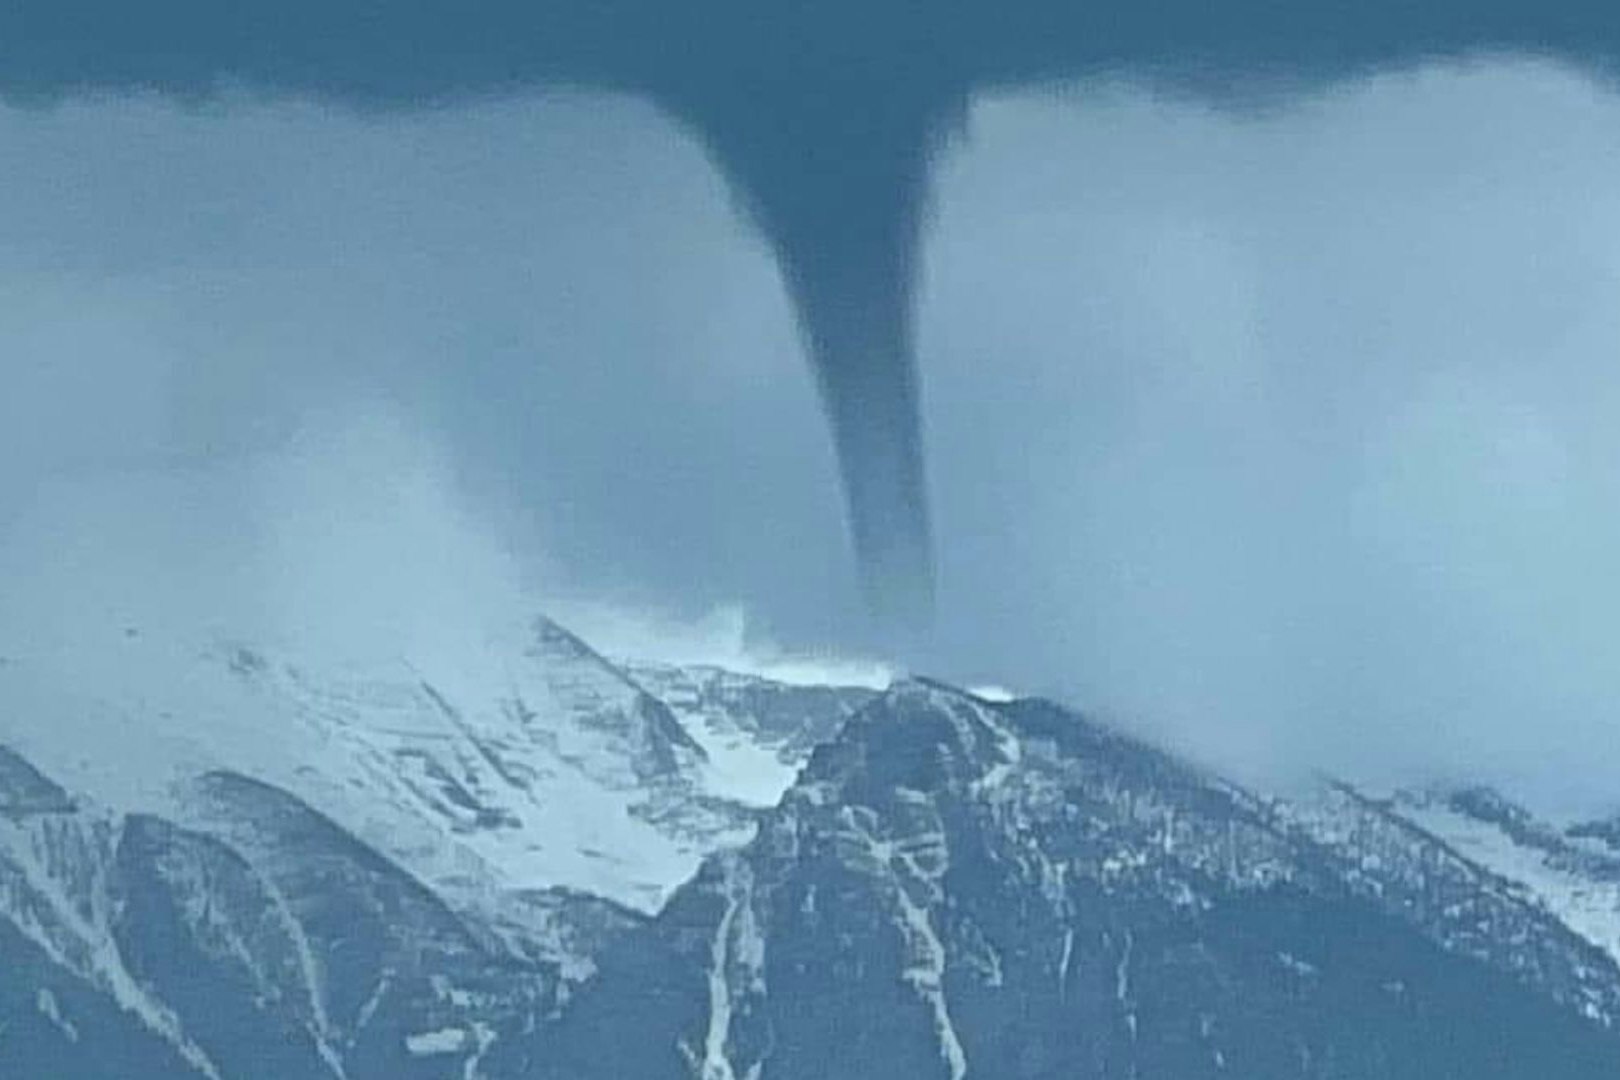 This photo of a land spout over a mountain peak in Montana went viral on social media.